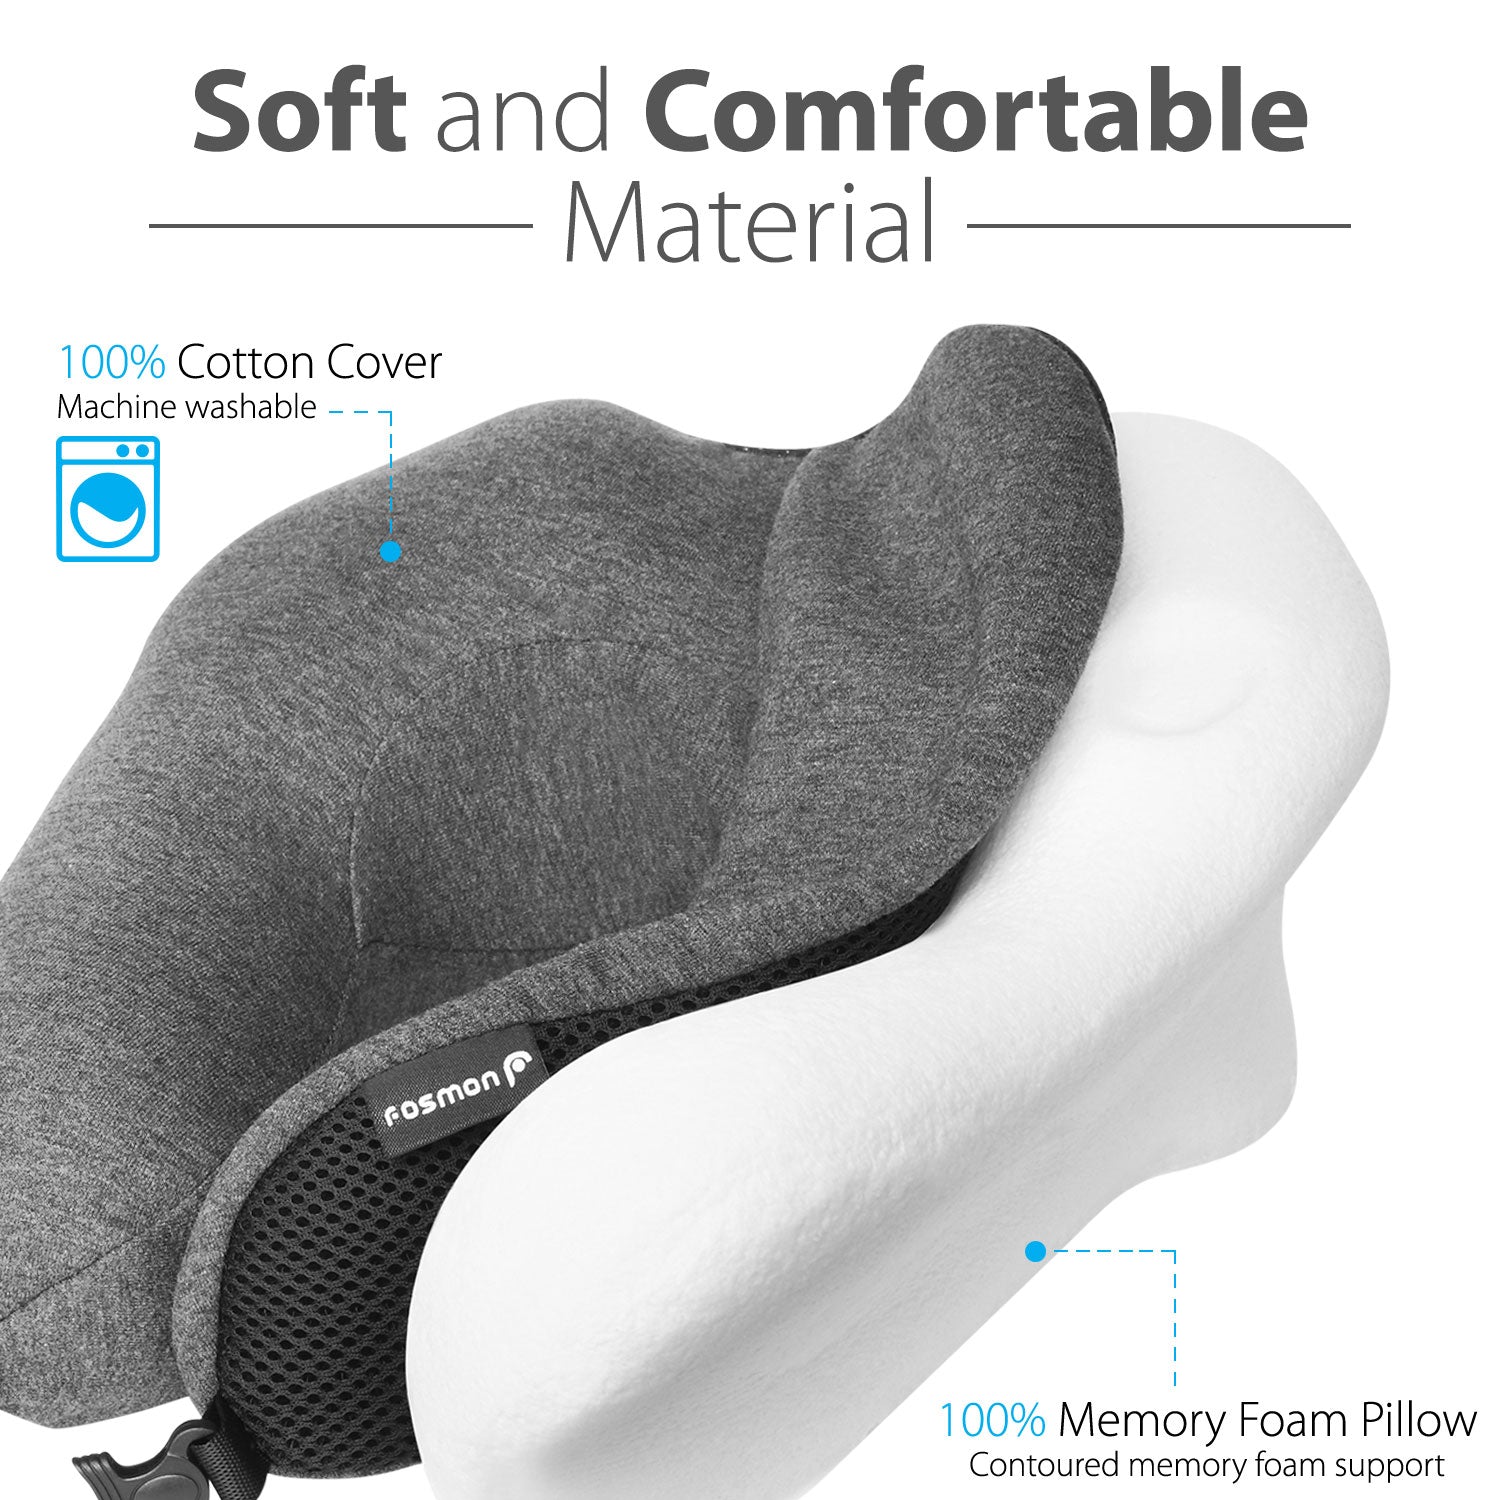 Fosmon Travel Neck Pillow With Storage Bag Kit, Soft Comfortable Memory Foam Neck Cushion, Head & Chin Support U-Shape Pillow, Machine Washable Cotton Cover for Traveling Airplane Flight, Car, Bus